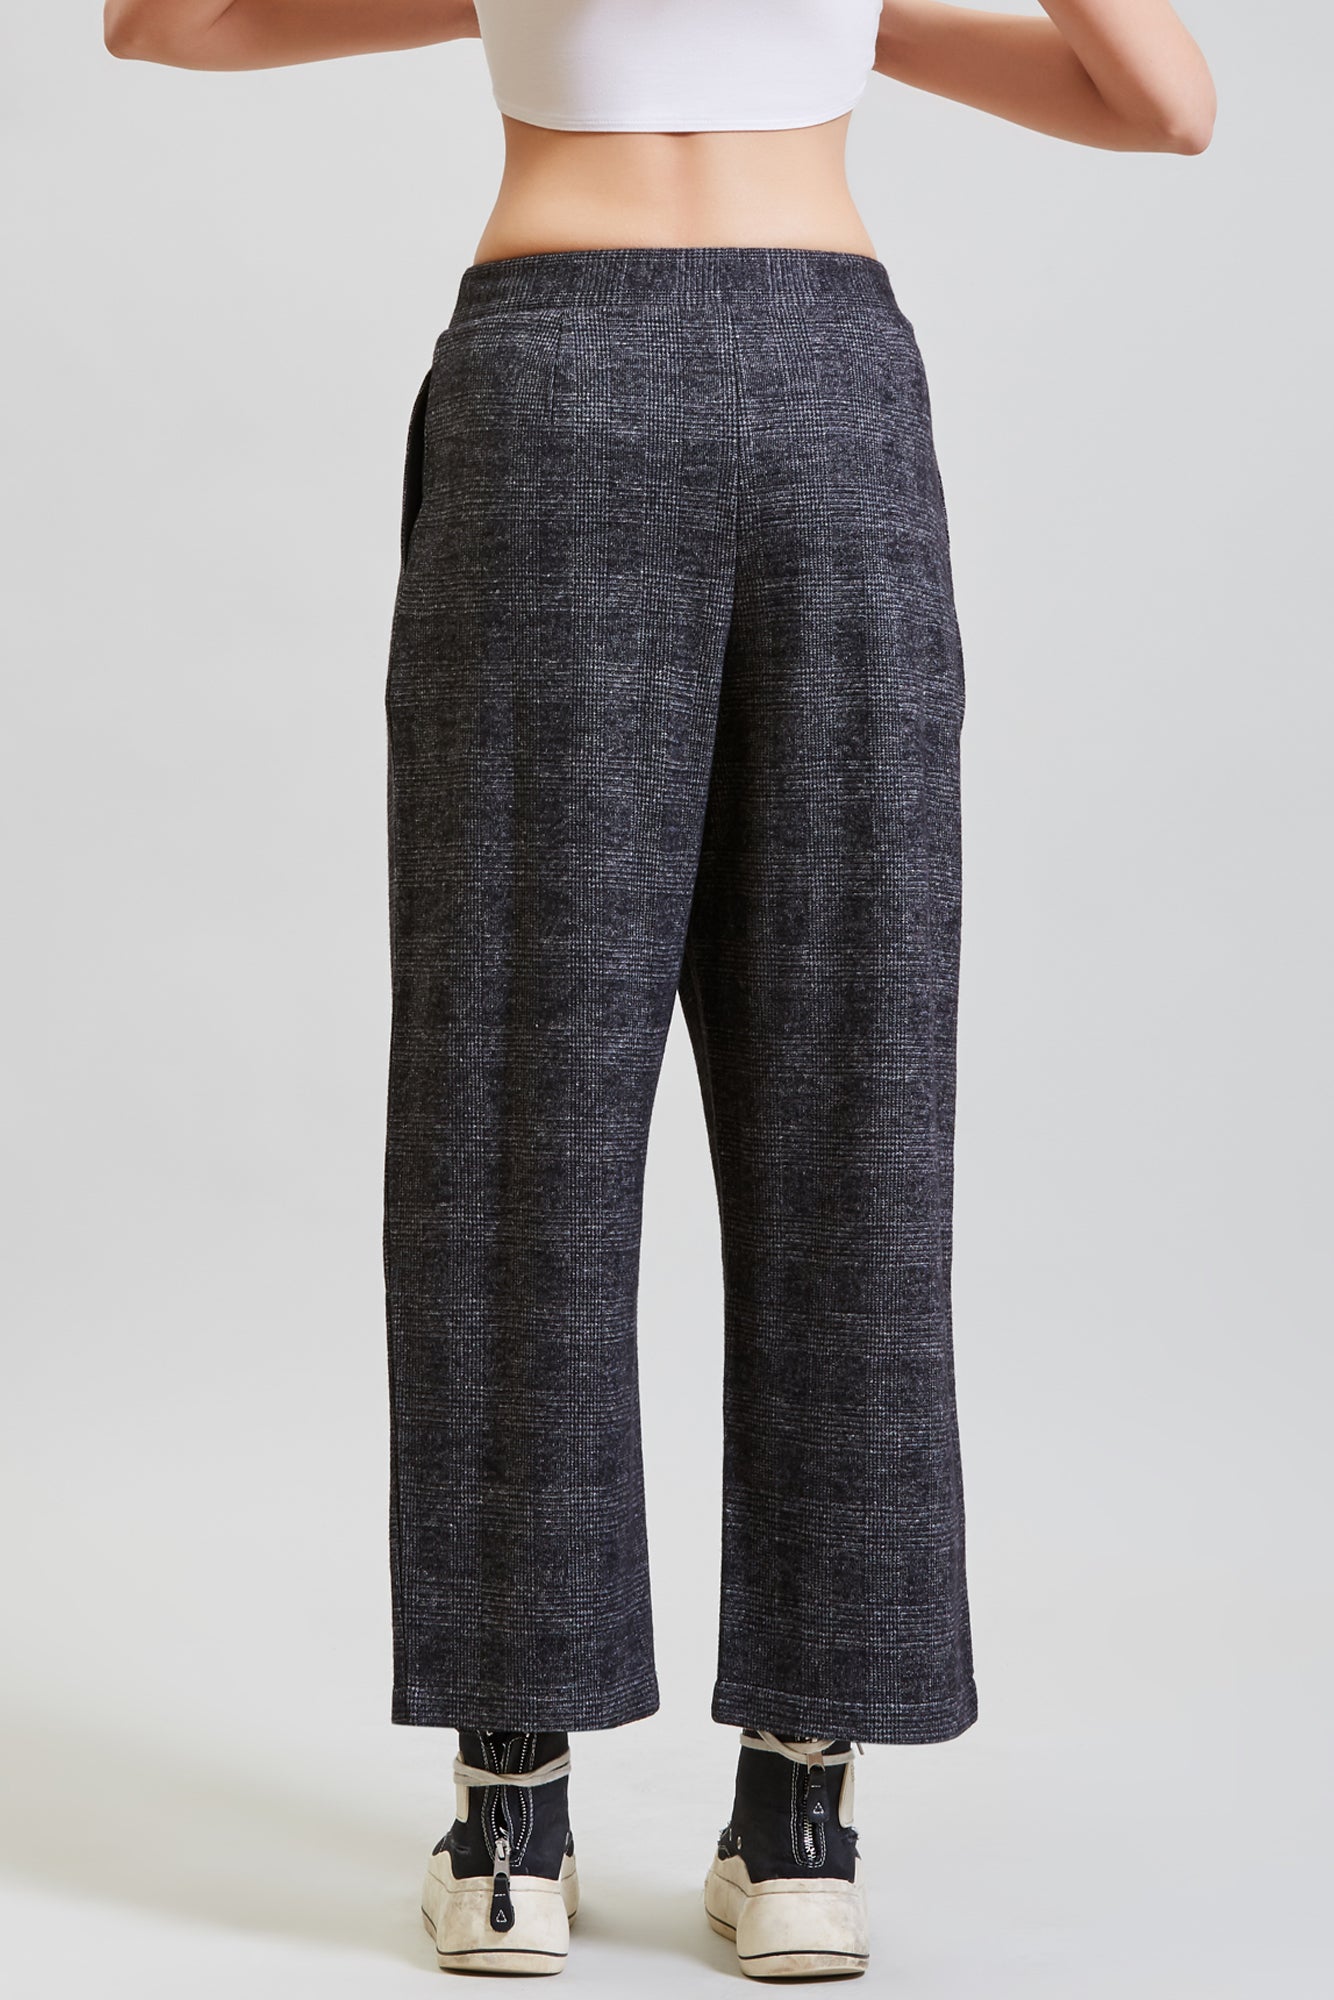 CROPPED PLEATED WIDE LEG PANT - GREY GLEN PLAID